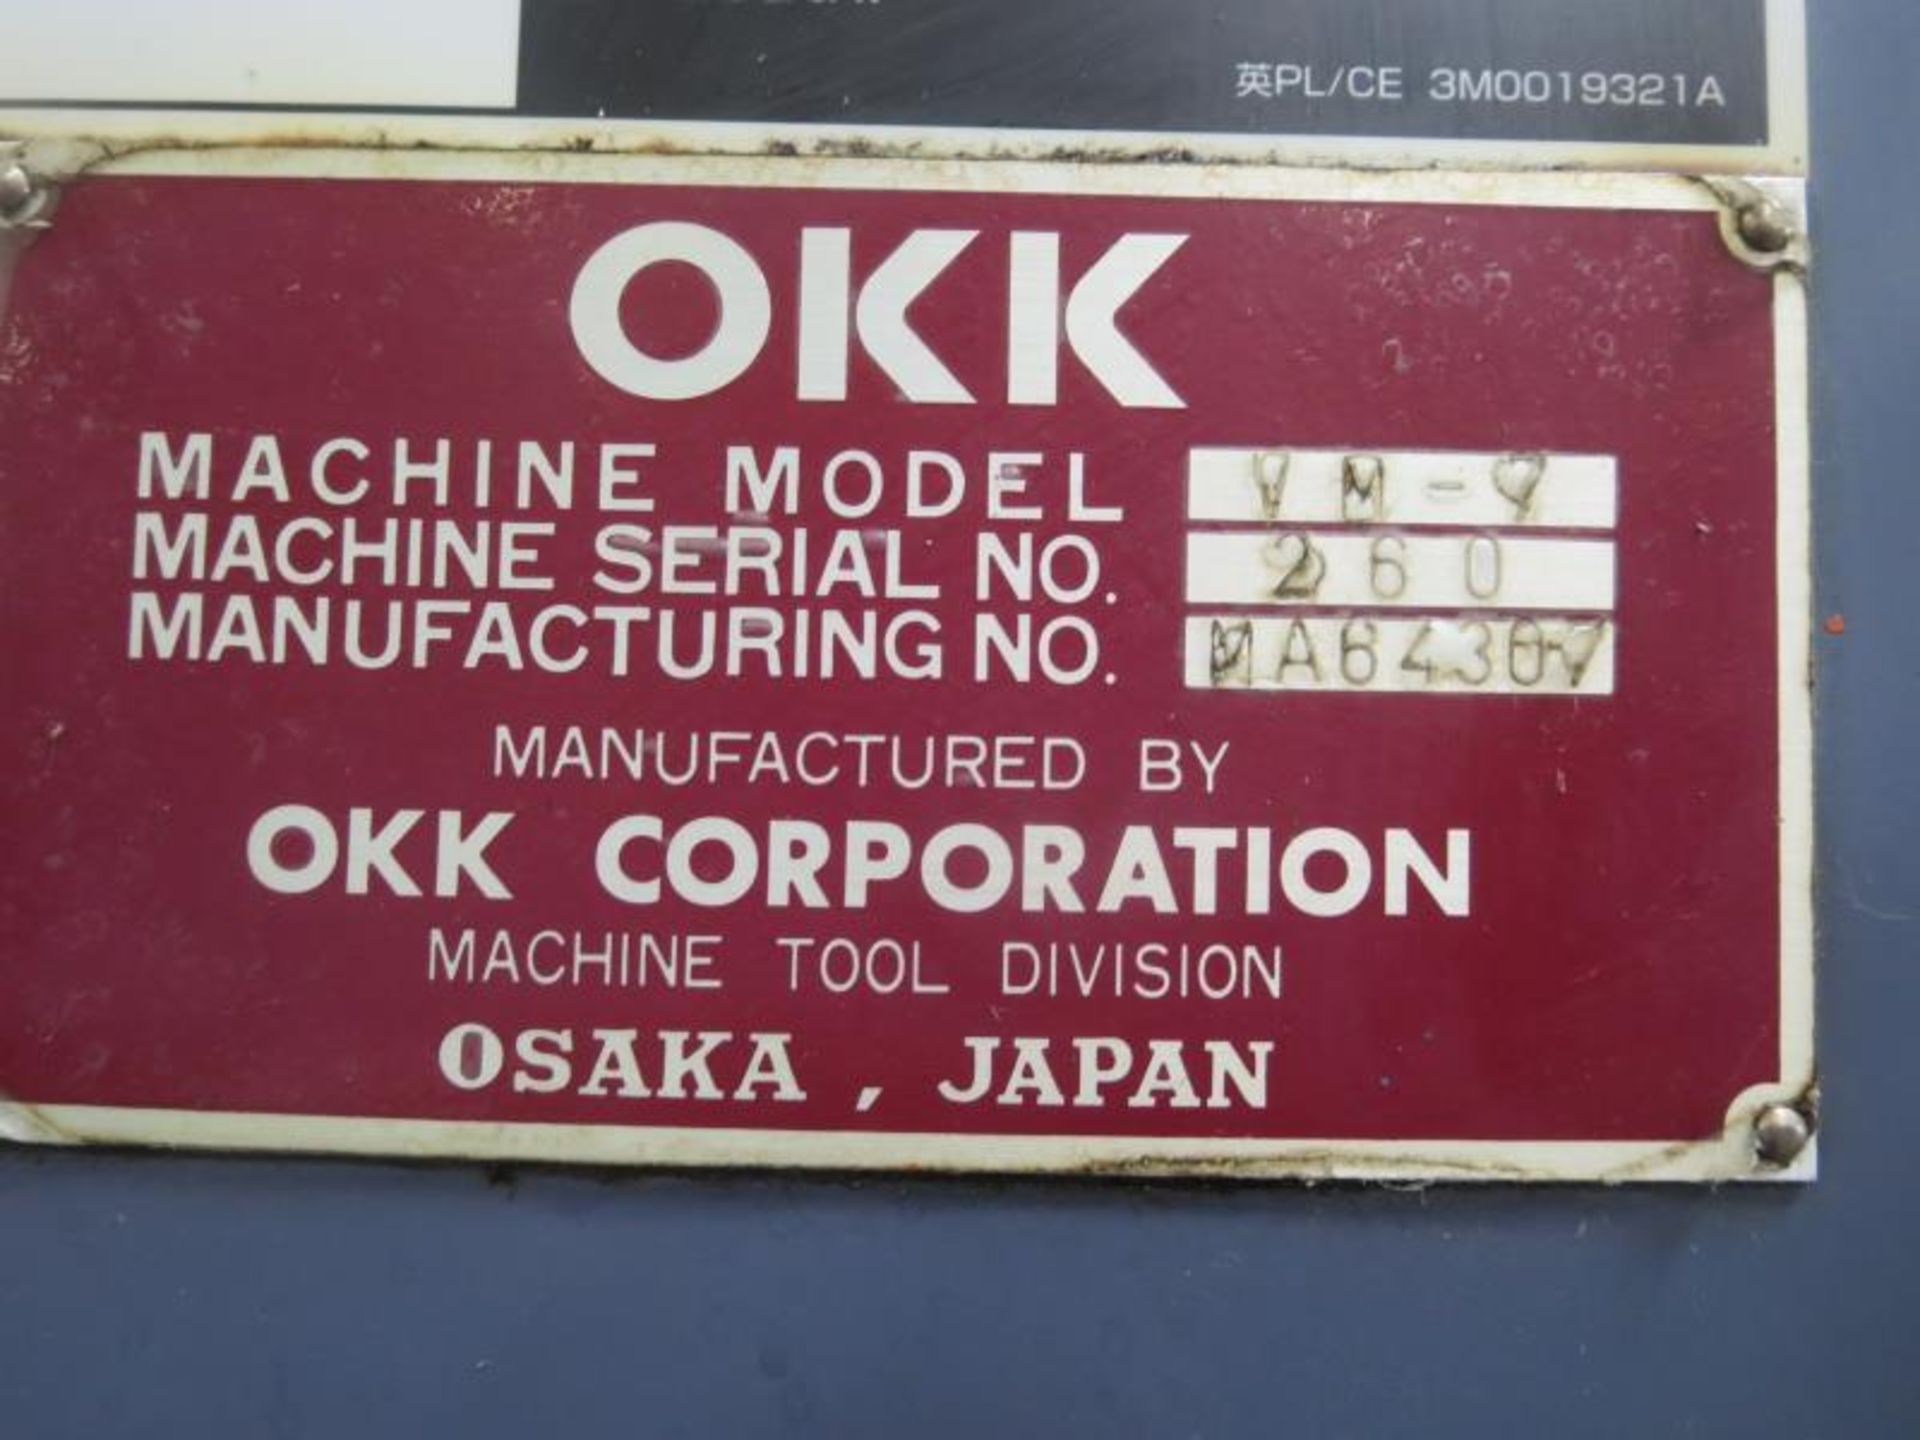 OKK VM7 CNC Vertical Machining Center. 3 Axis 7.5hp, 2 Step Max 10,000 RPM Spindle, Approx. 61" x - Image 10 of 13